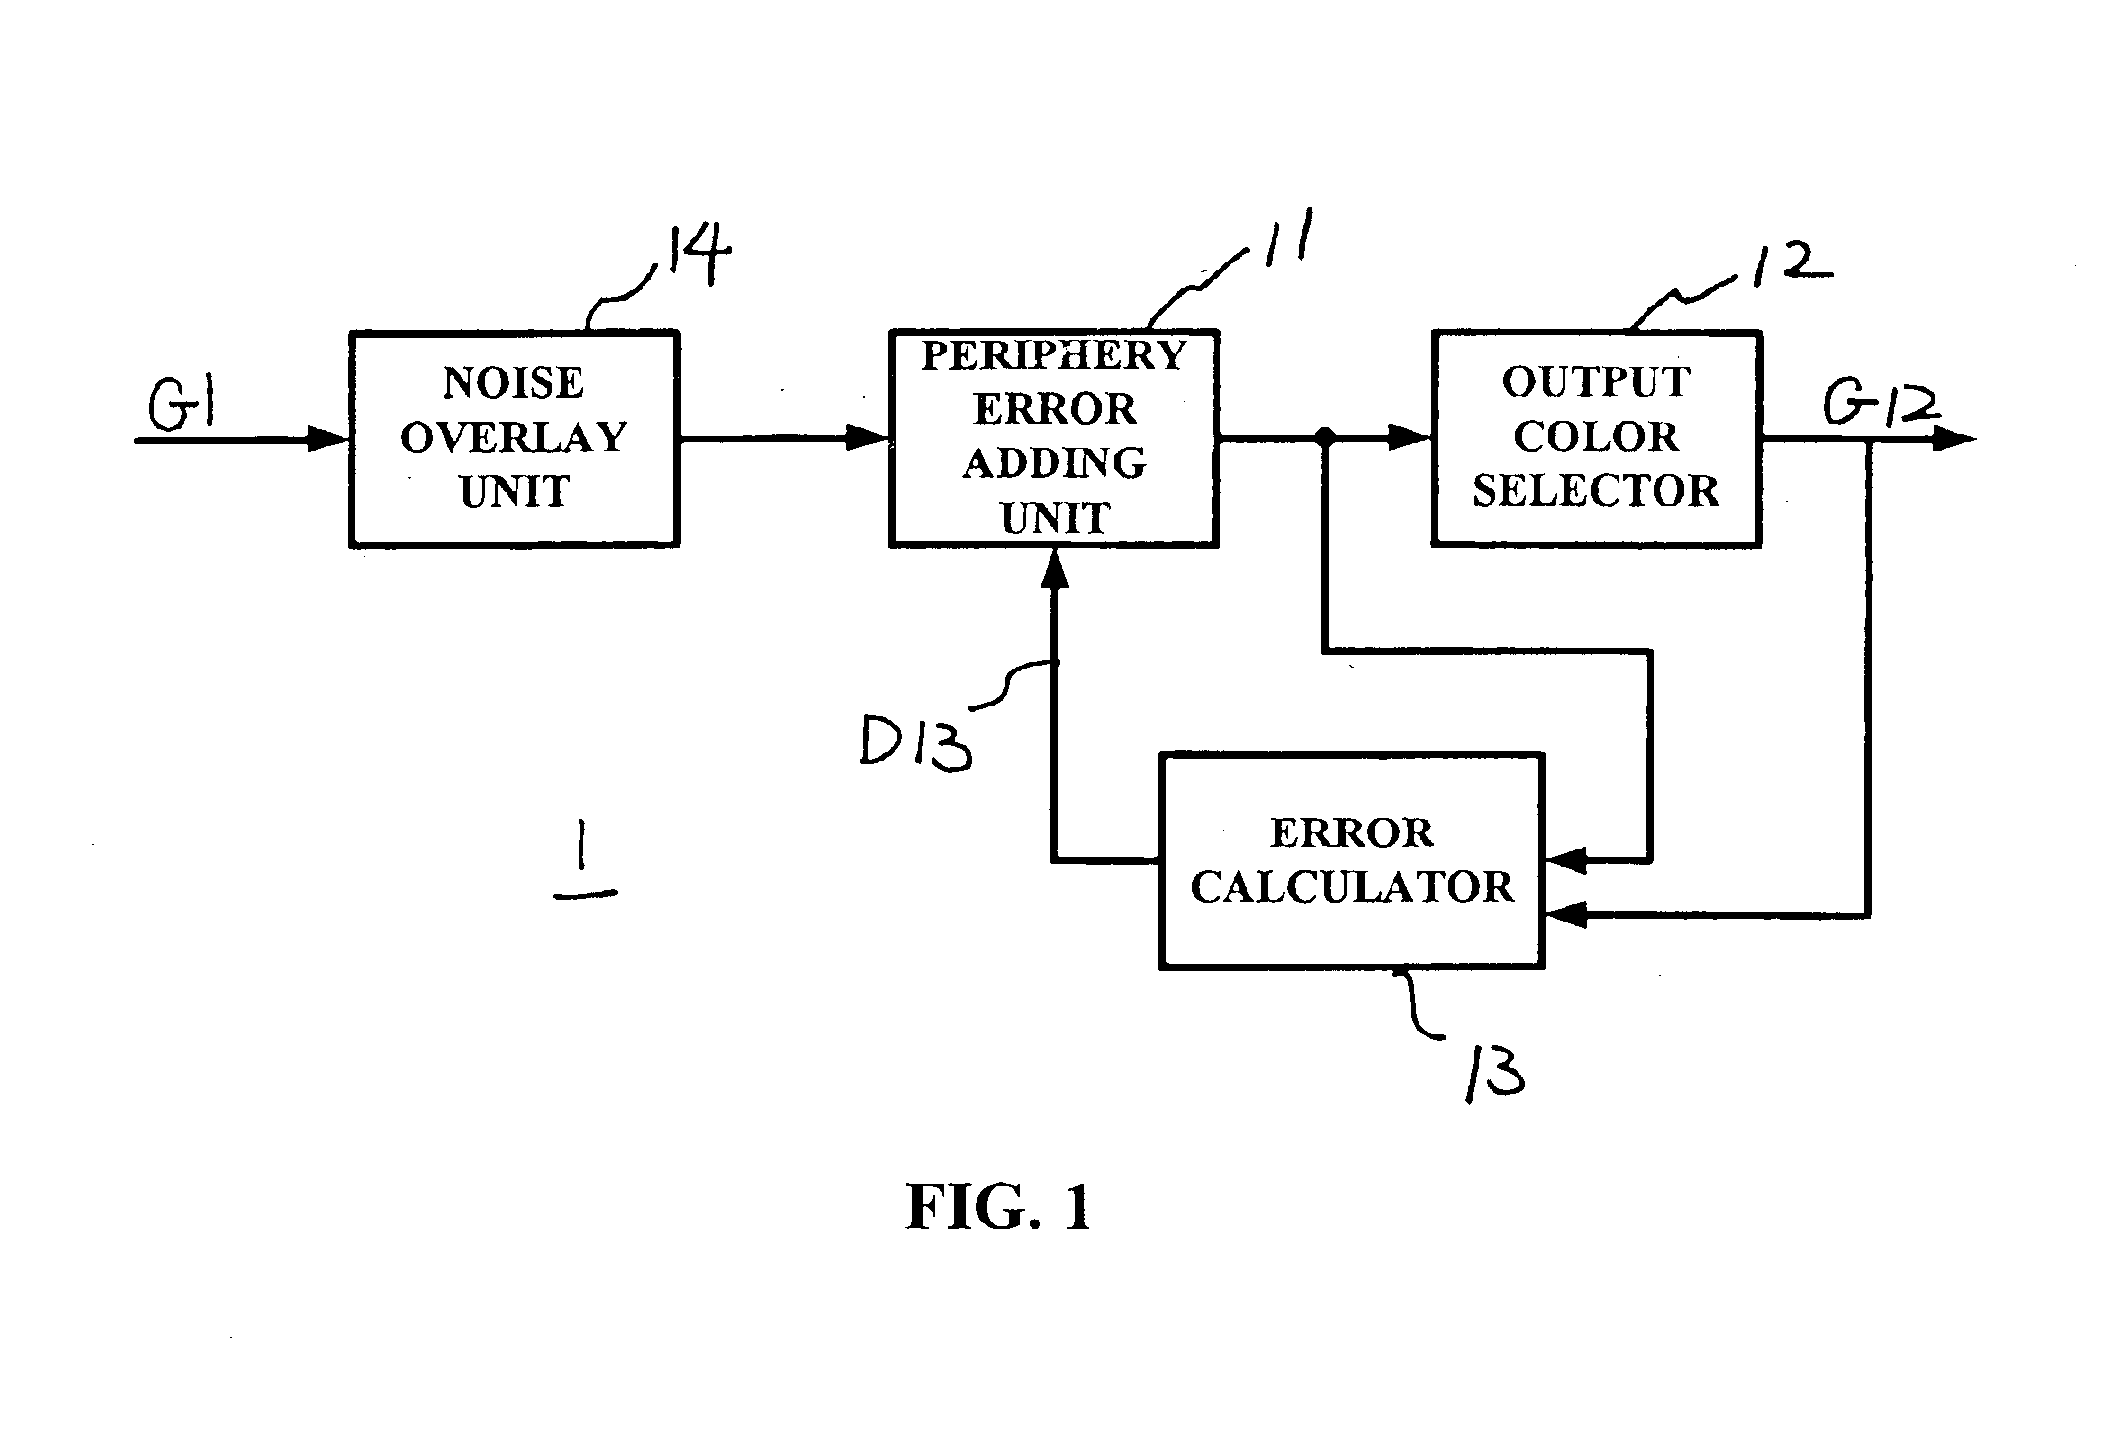 Image error diffusion device with noise superposition